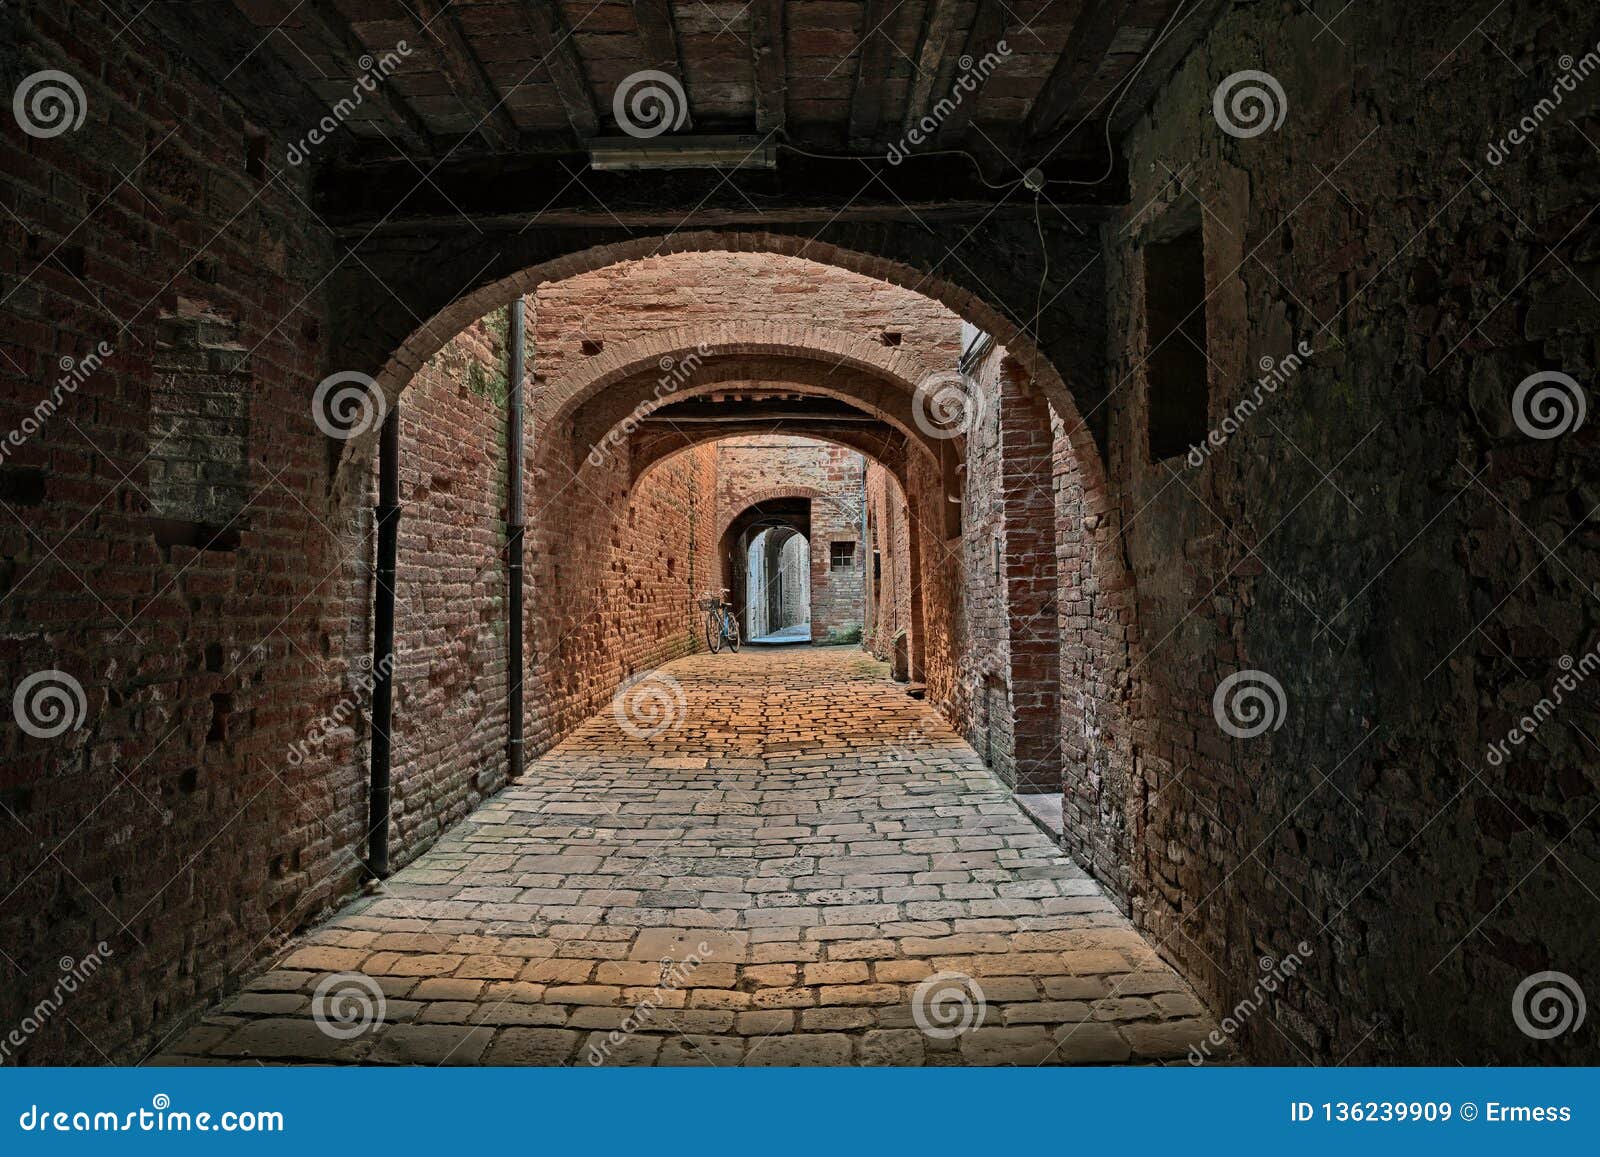 buonconvento, siena, tuscany, italy : the covered street via oscura in the old town